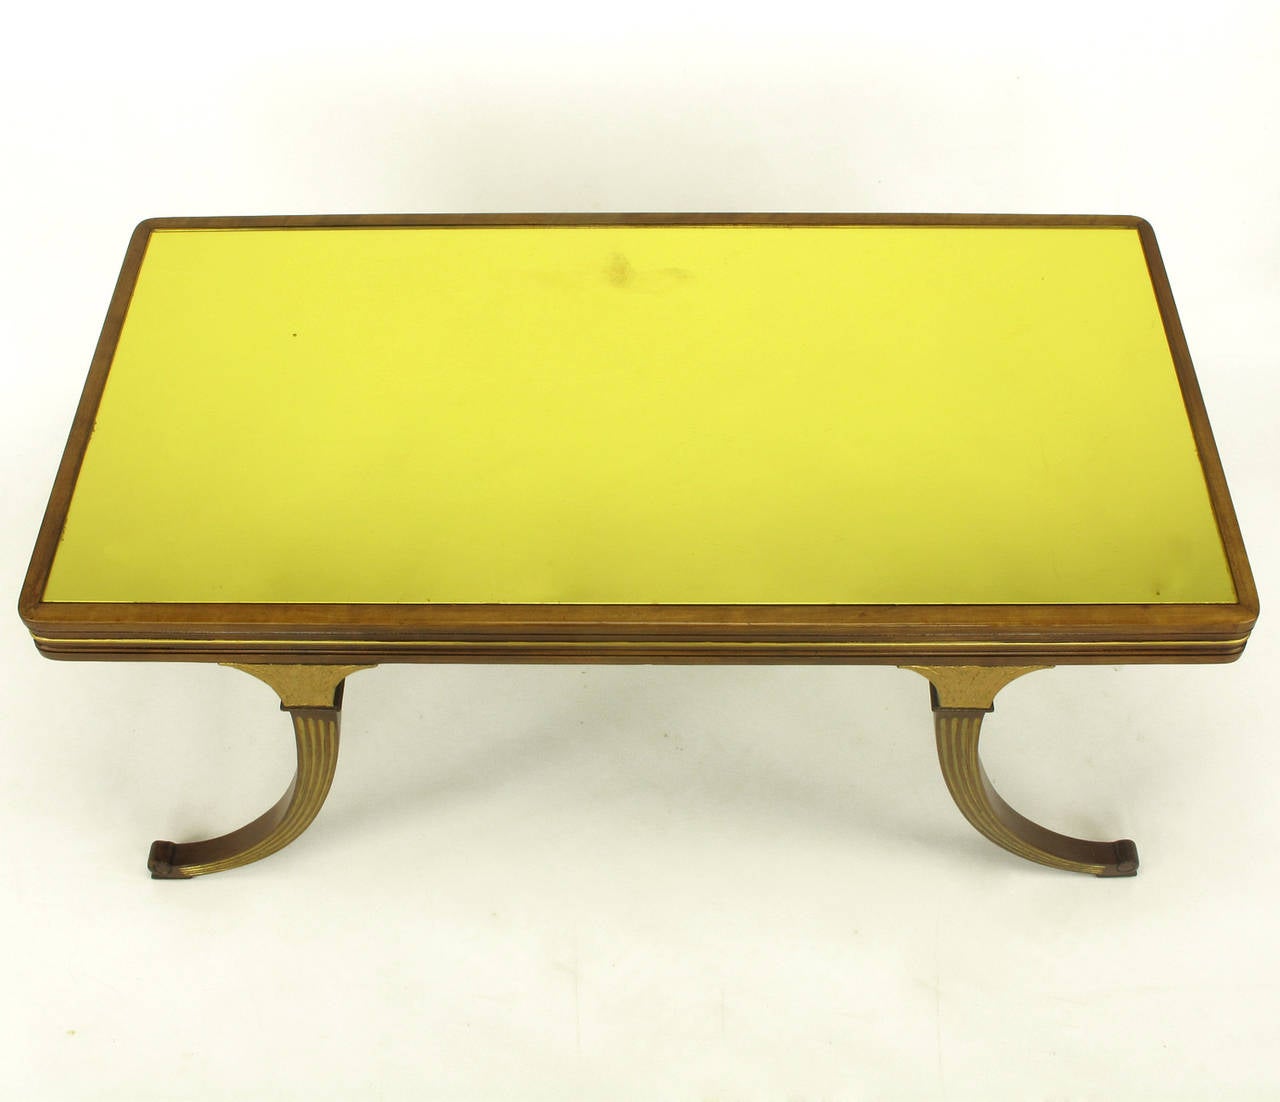 Early 1900s Parcel-Gilt and Walnut Empire Coffee Table with Gold Mirror Top For Sale 1